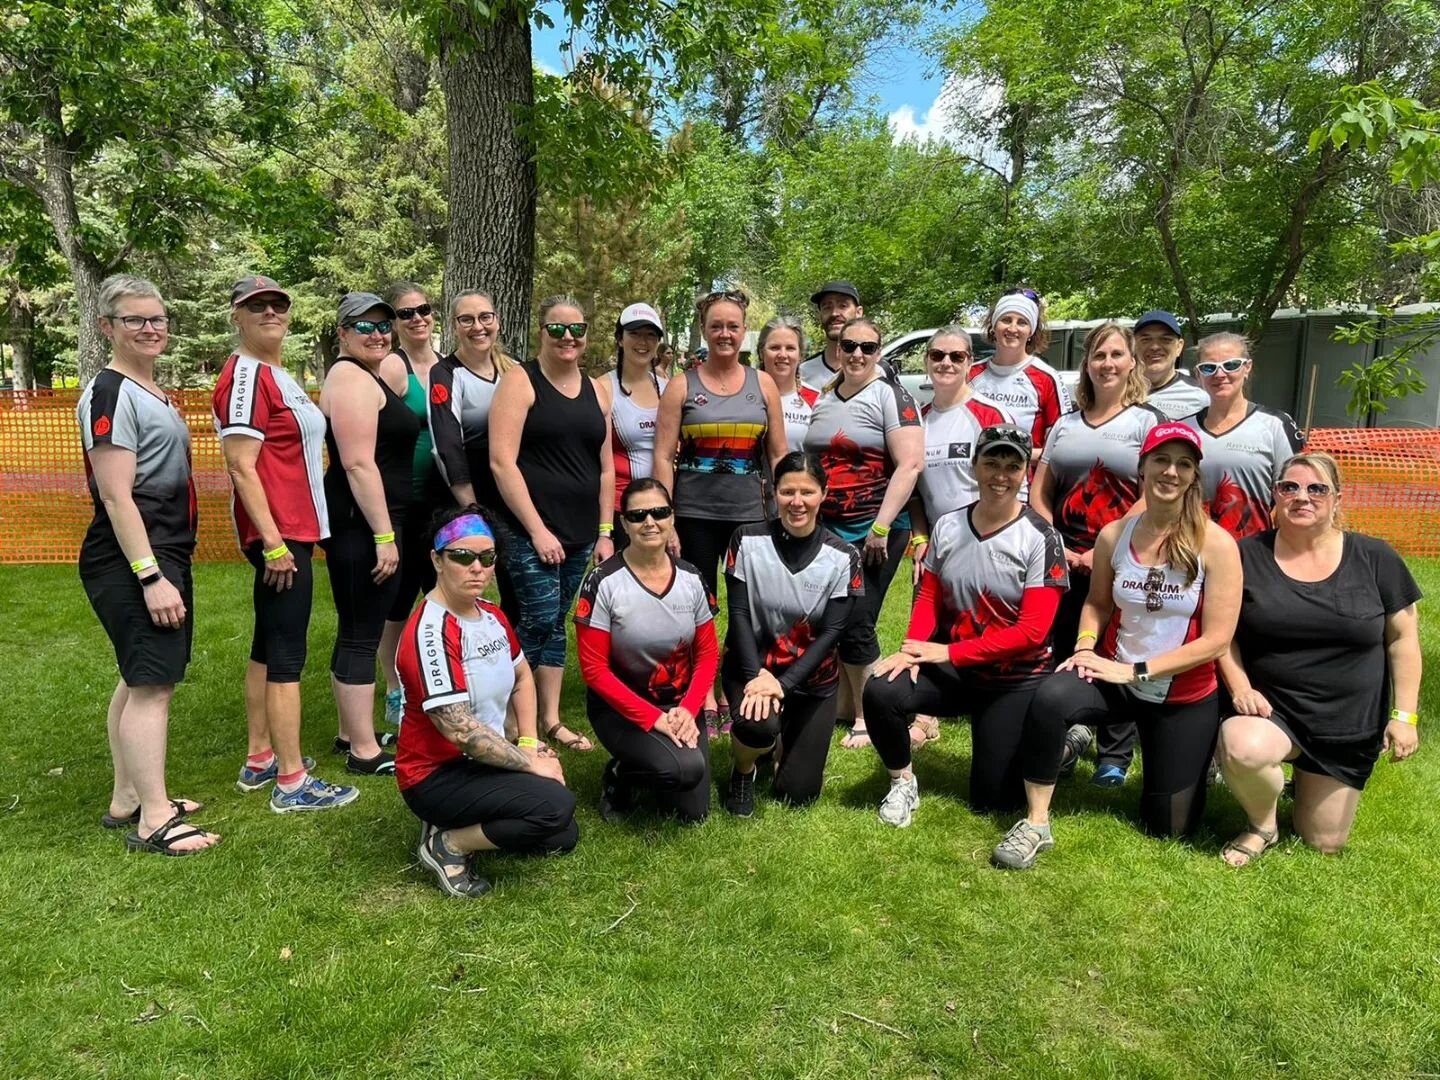 Great time racing for Red Tomatoes Women Day 1 of qualifiers, going into Div A semifinals tomorrow! 
.
.
#lethdragonfest #lethdragonfest22 #paddlesupyyc #redeyesdragonboat #redtomatoes